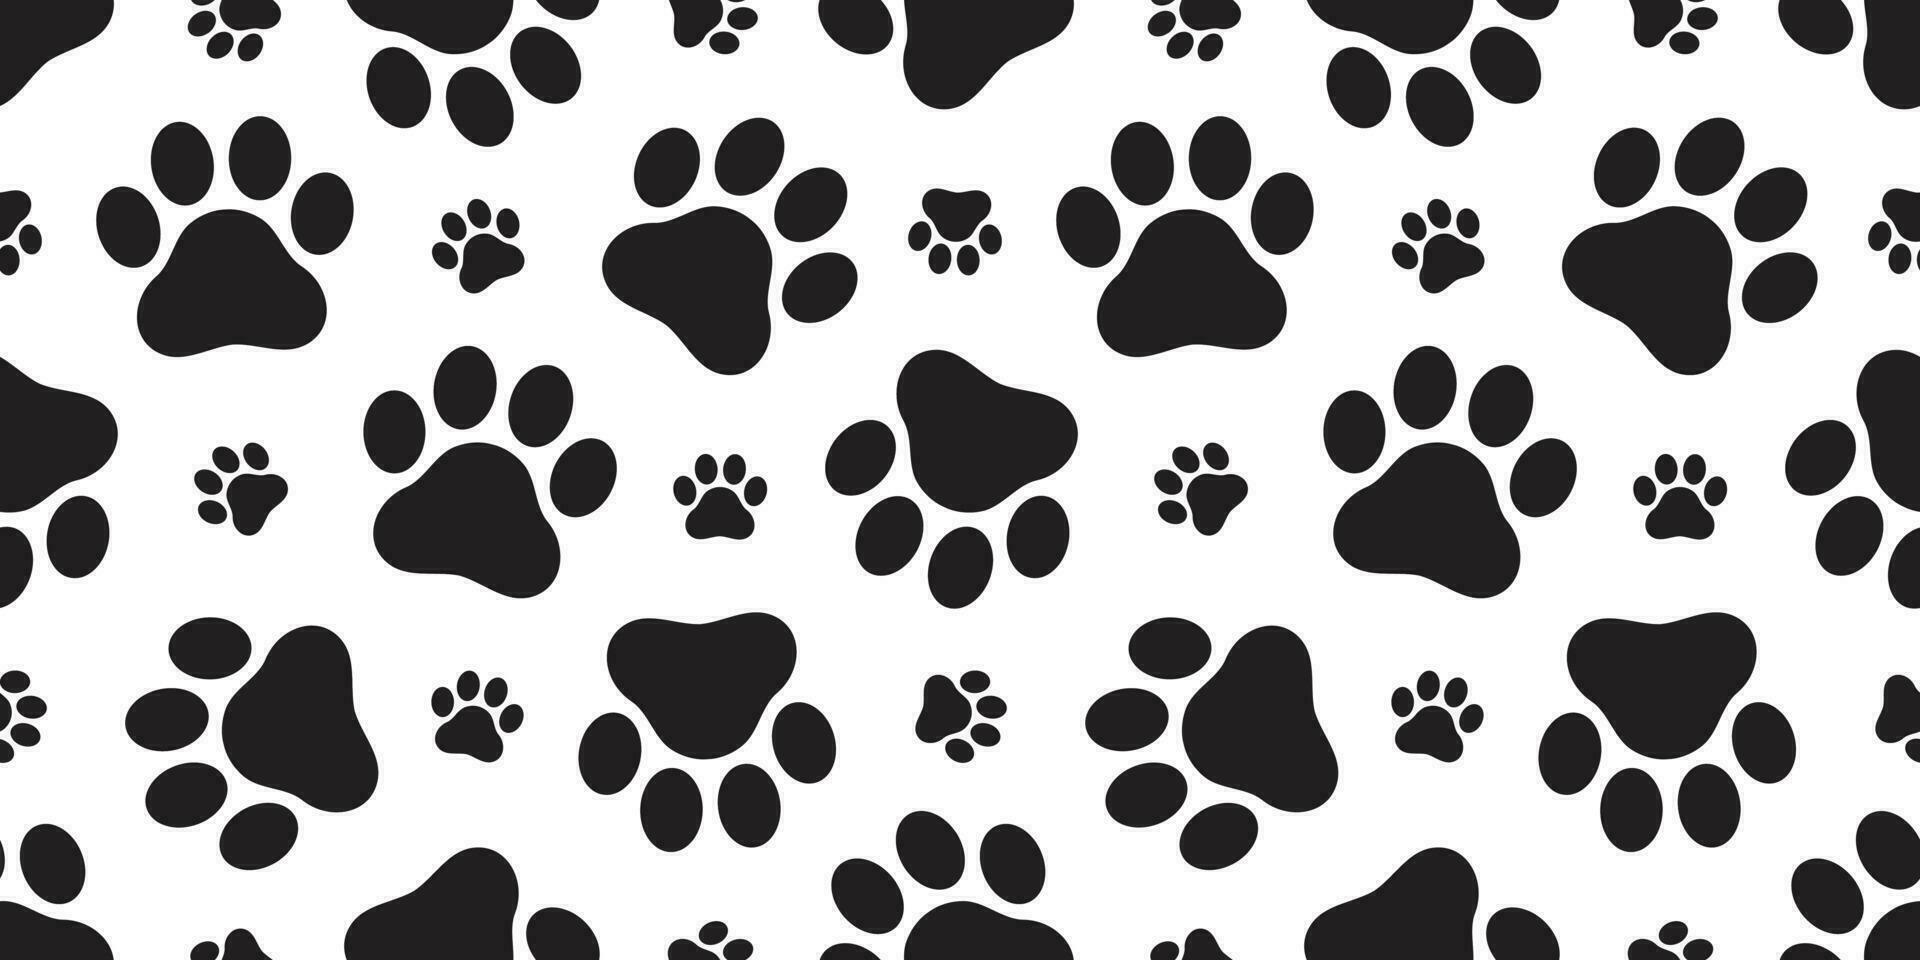 Dog Paw seamless pattern vector footprint kitten puppy tile background repeat wallpaper cartoon isolated illustration white